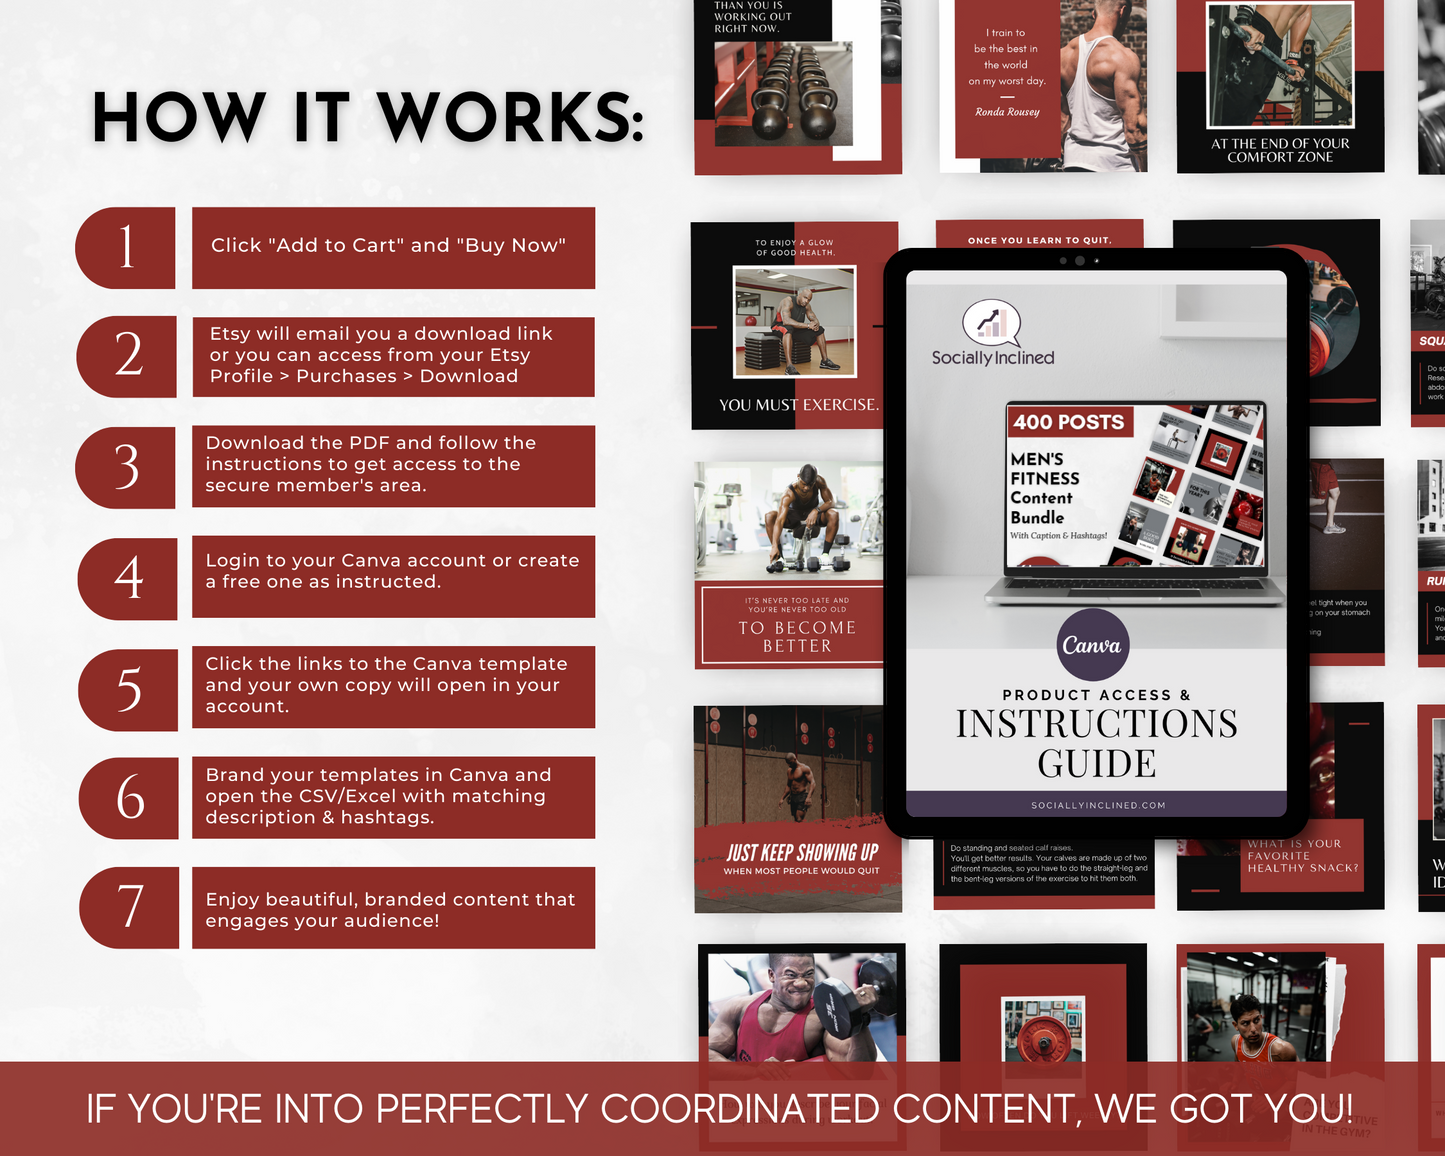 Learn how the Men's Fitness Social Media Post Bundle with Canva Templates by Socially Inclined maintains a healthy lifestyle.